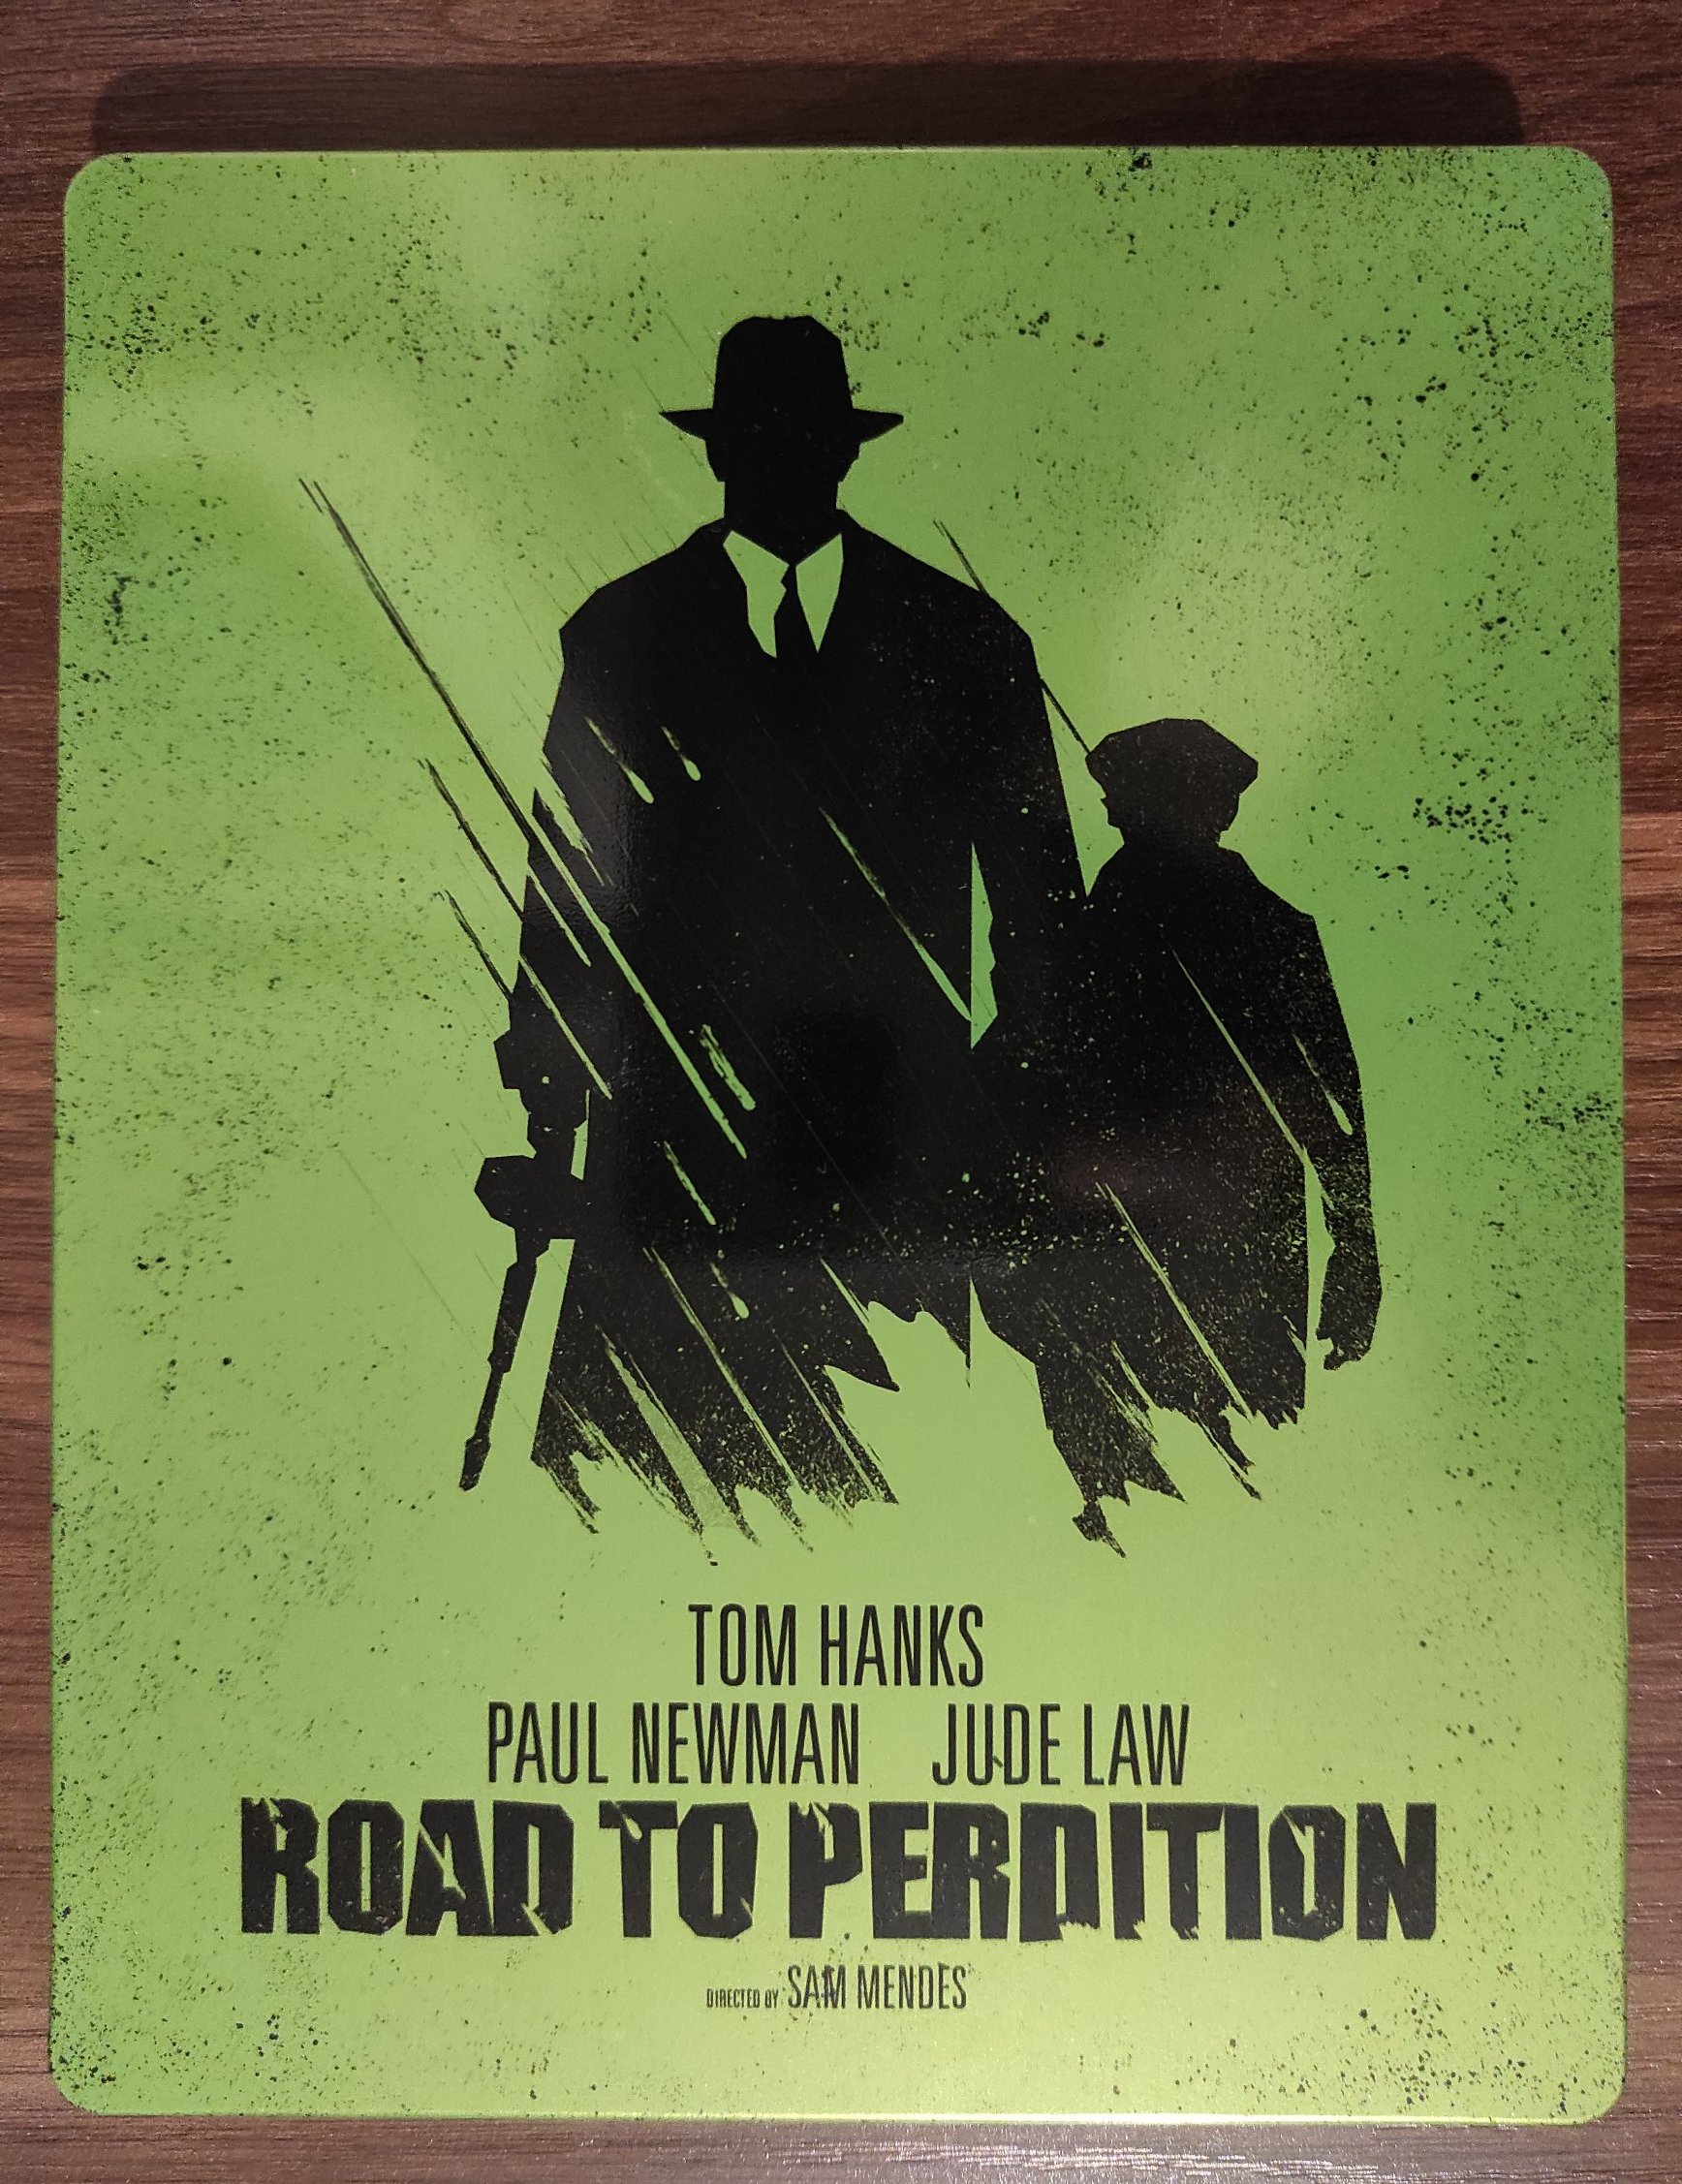 Kriegler Road To Perdition 02 Bluray Steelbook For Mondayblus This Week Physicalmedia T Co Y5ptrkqr6t Twitter